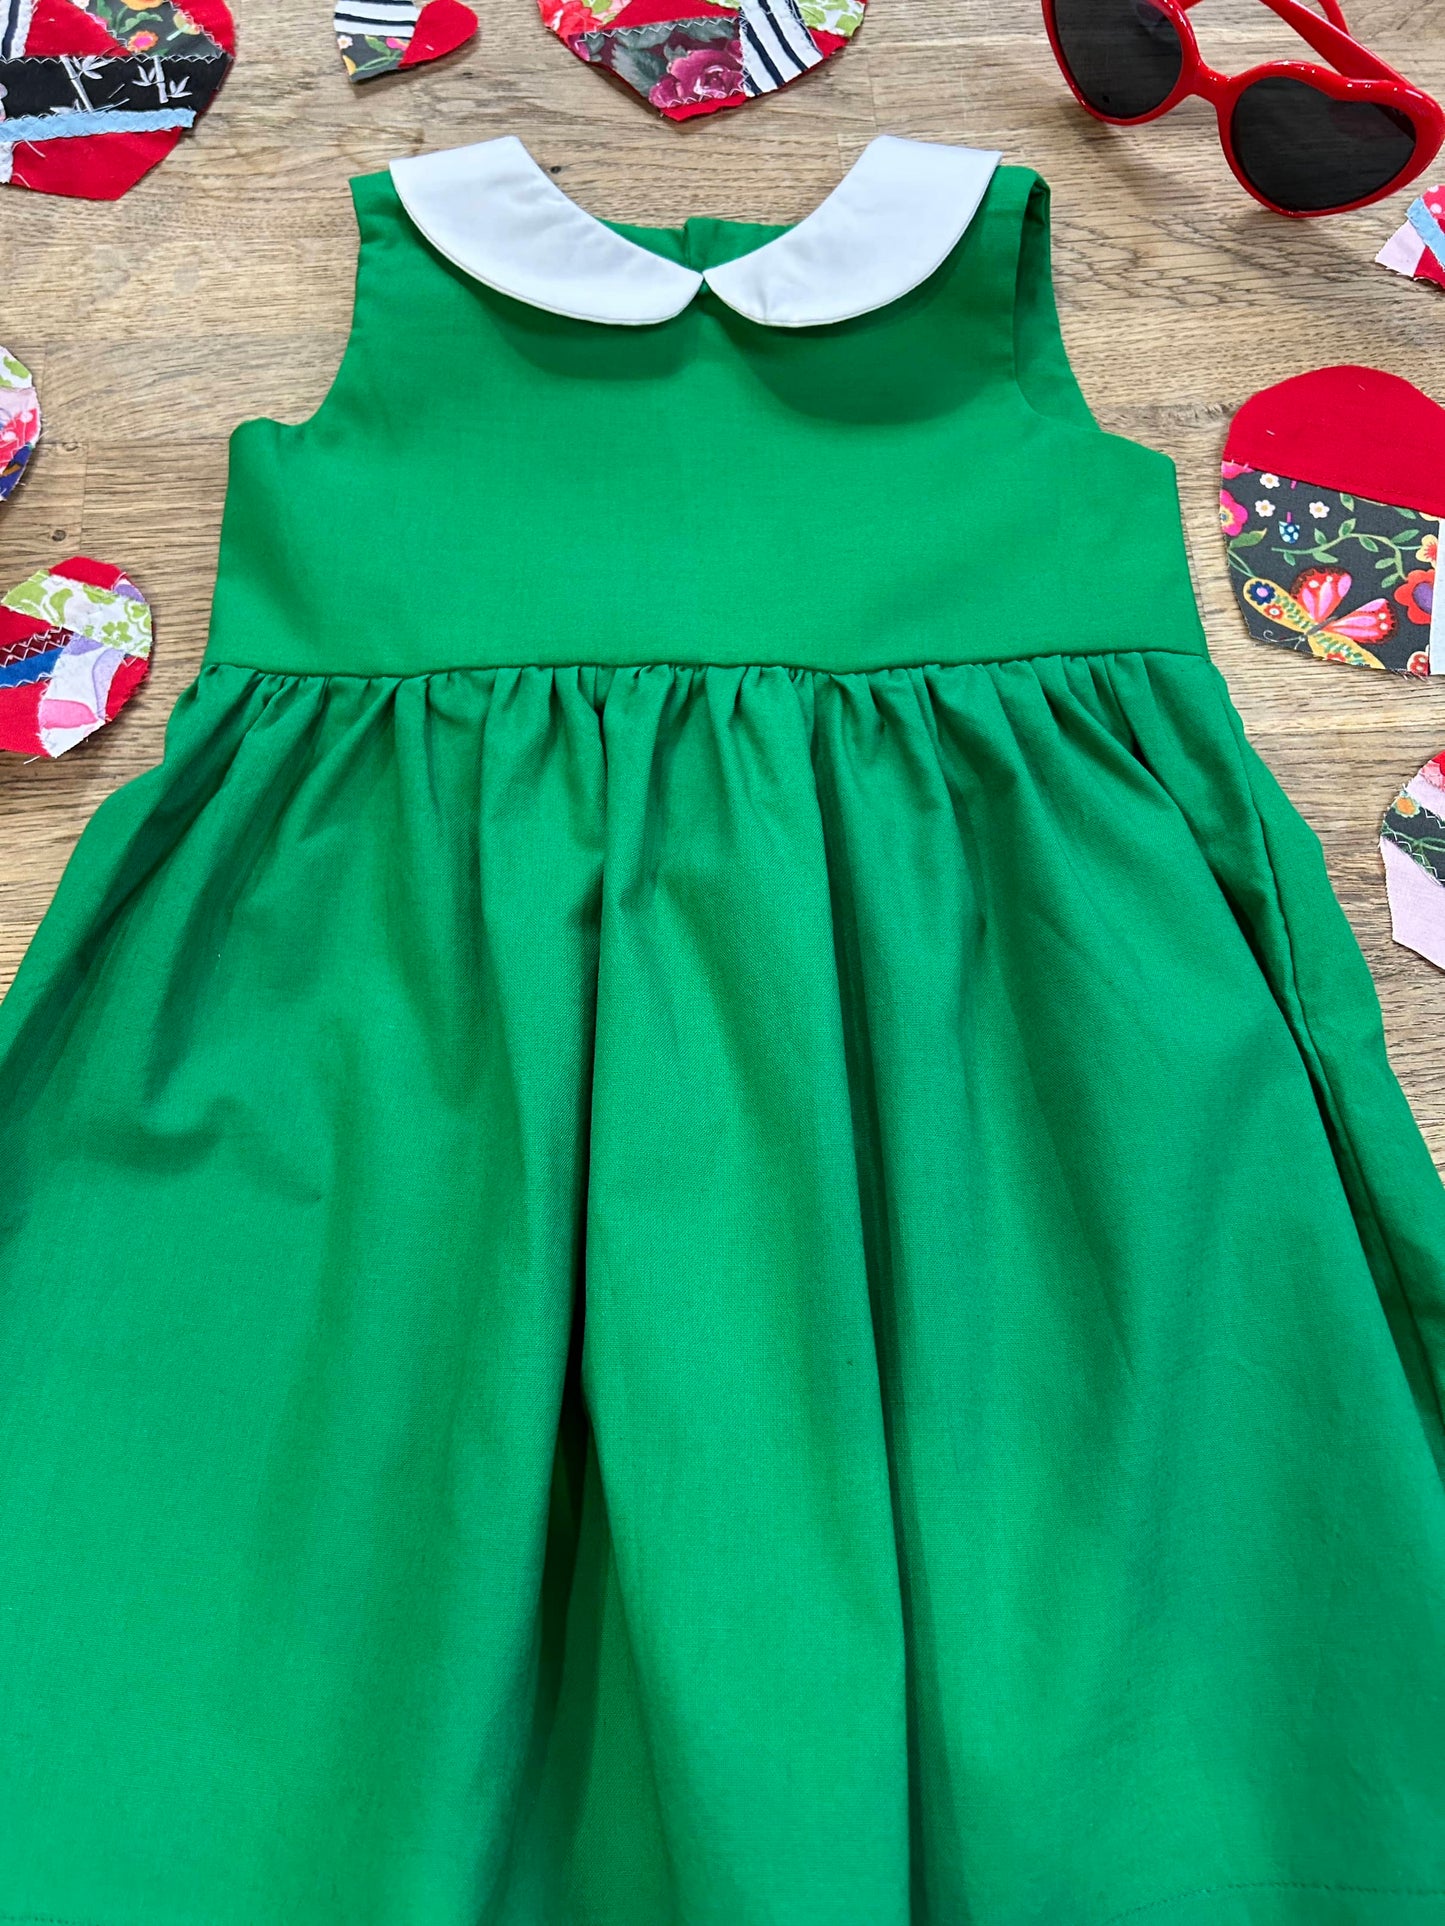 Classic Green Dress with Peter Pan Collar (SAMPLE) Size 3t